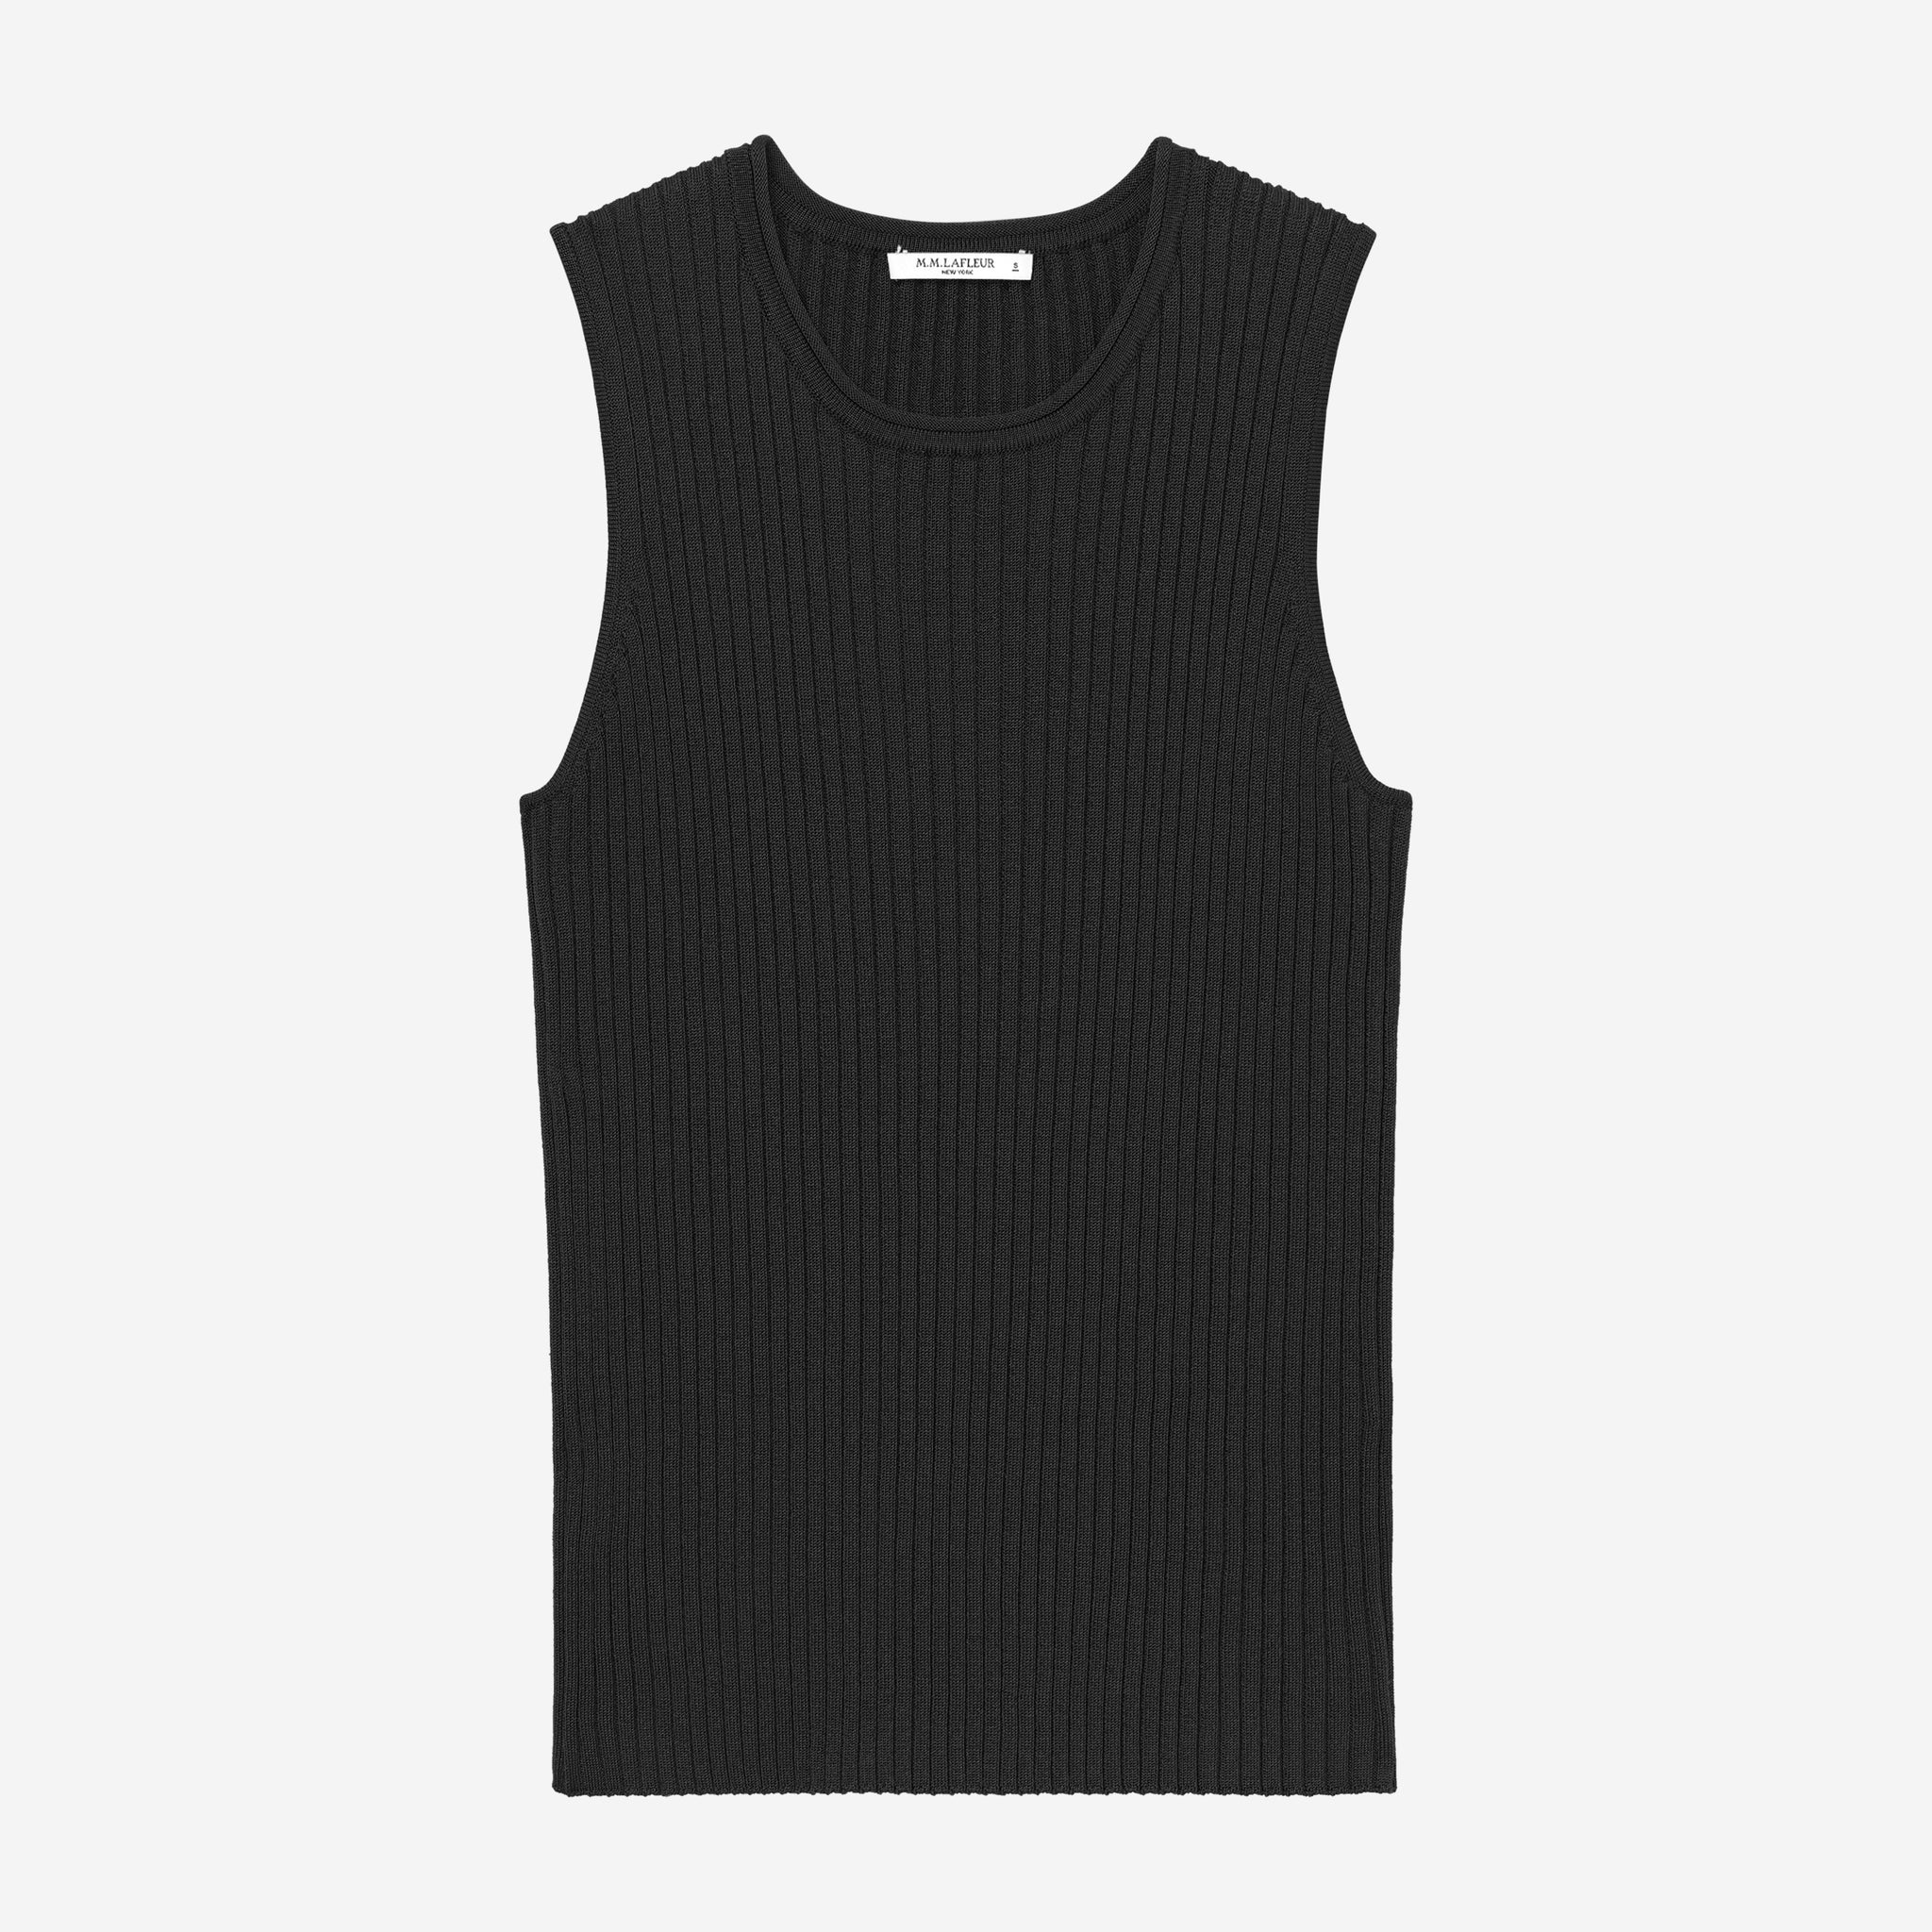 still image of the avery top in black